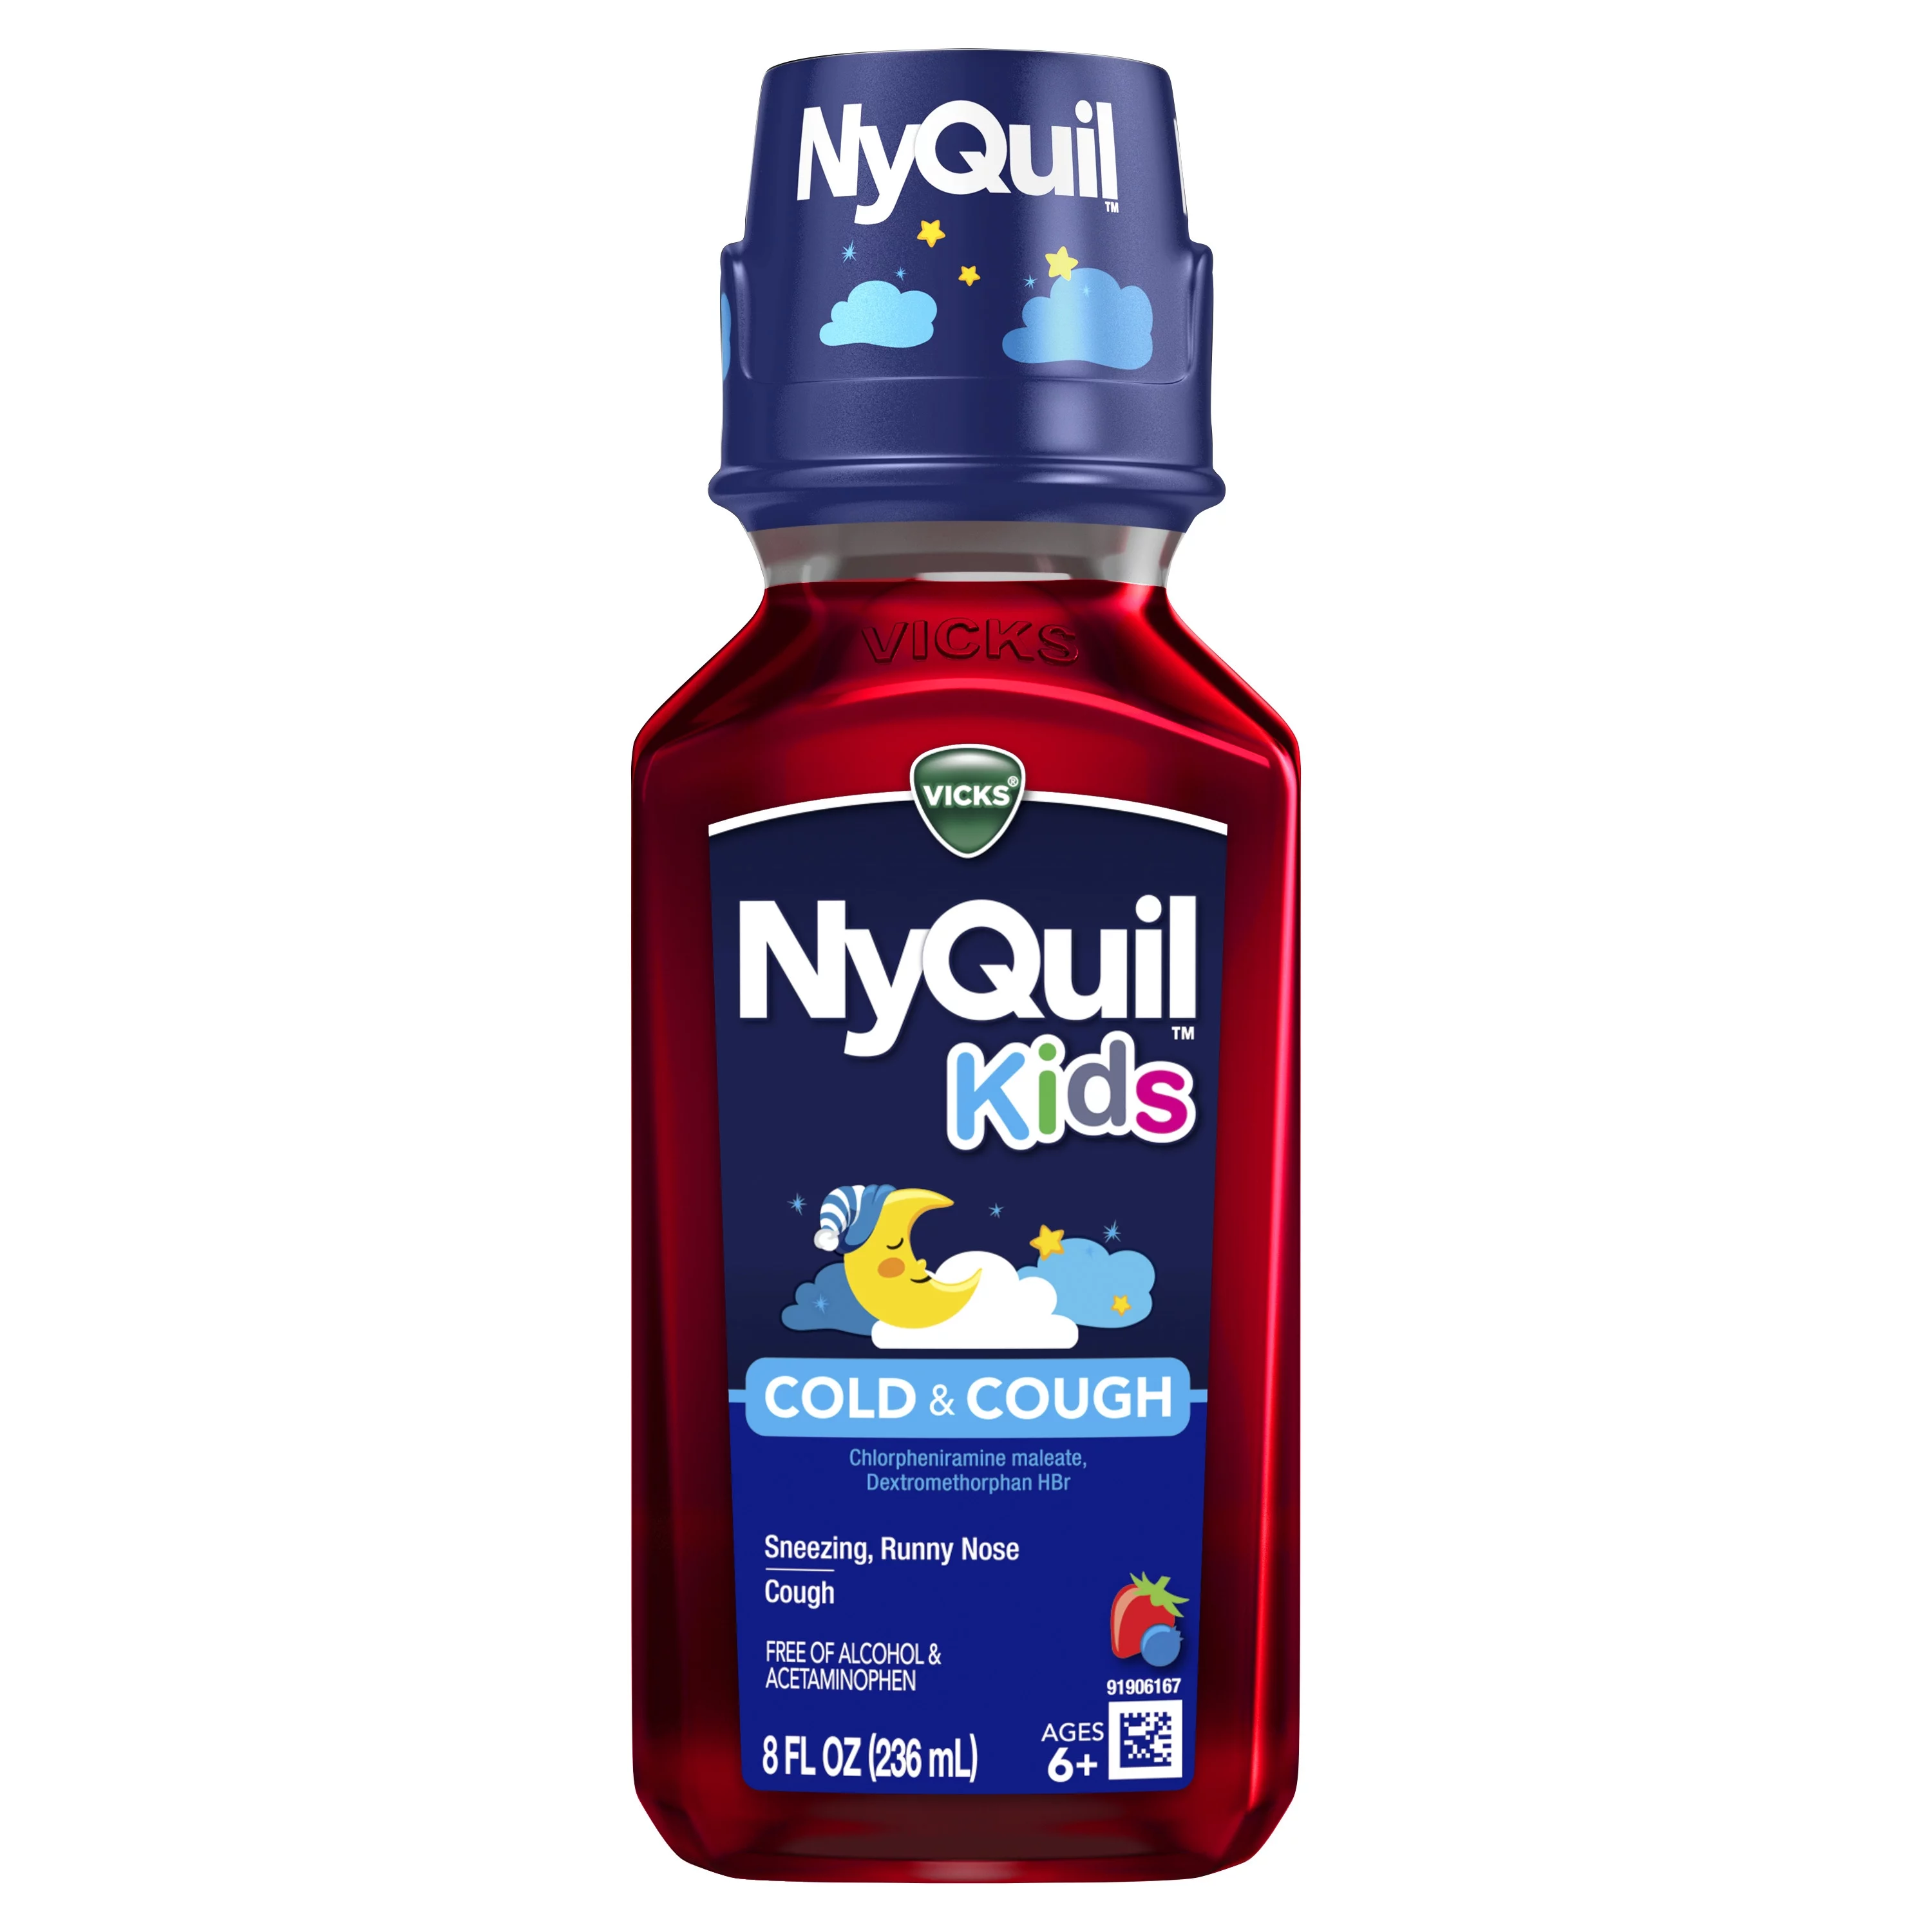 Vicks NyQuil Kid's Cold and Cough Medicine, 8 fl oz